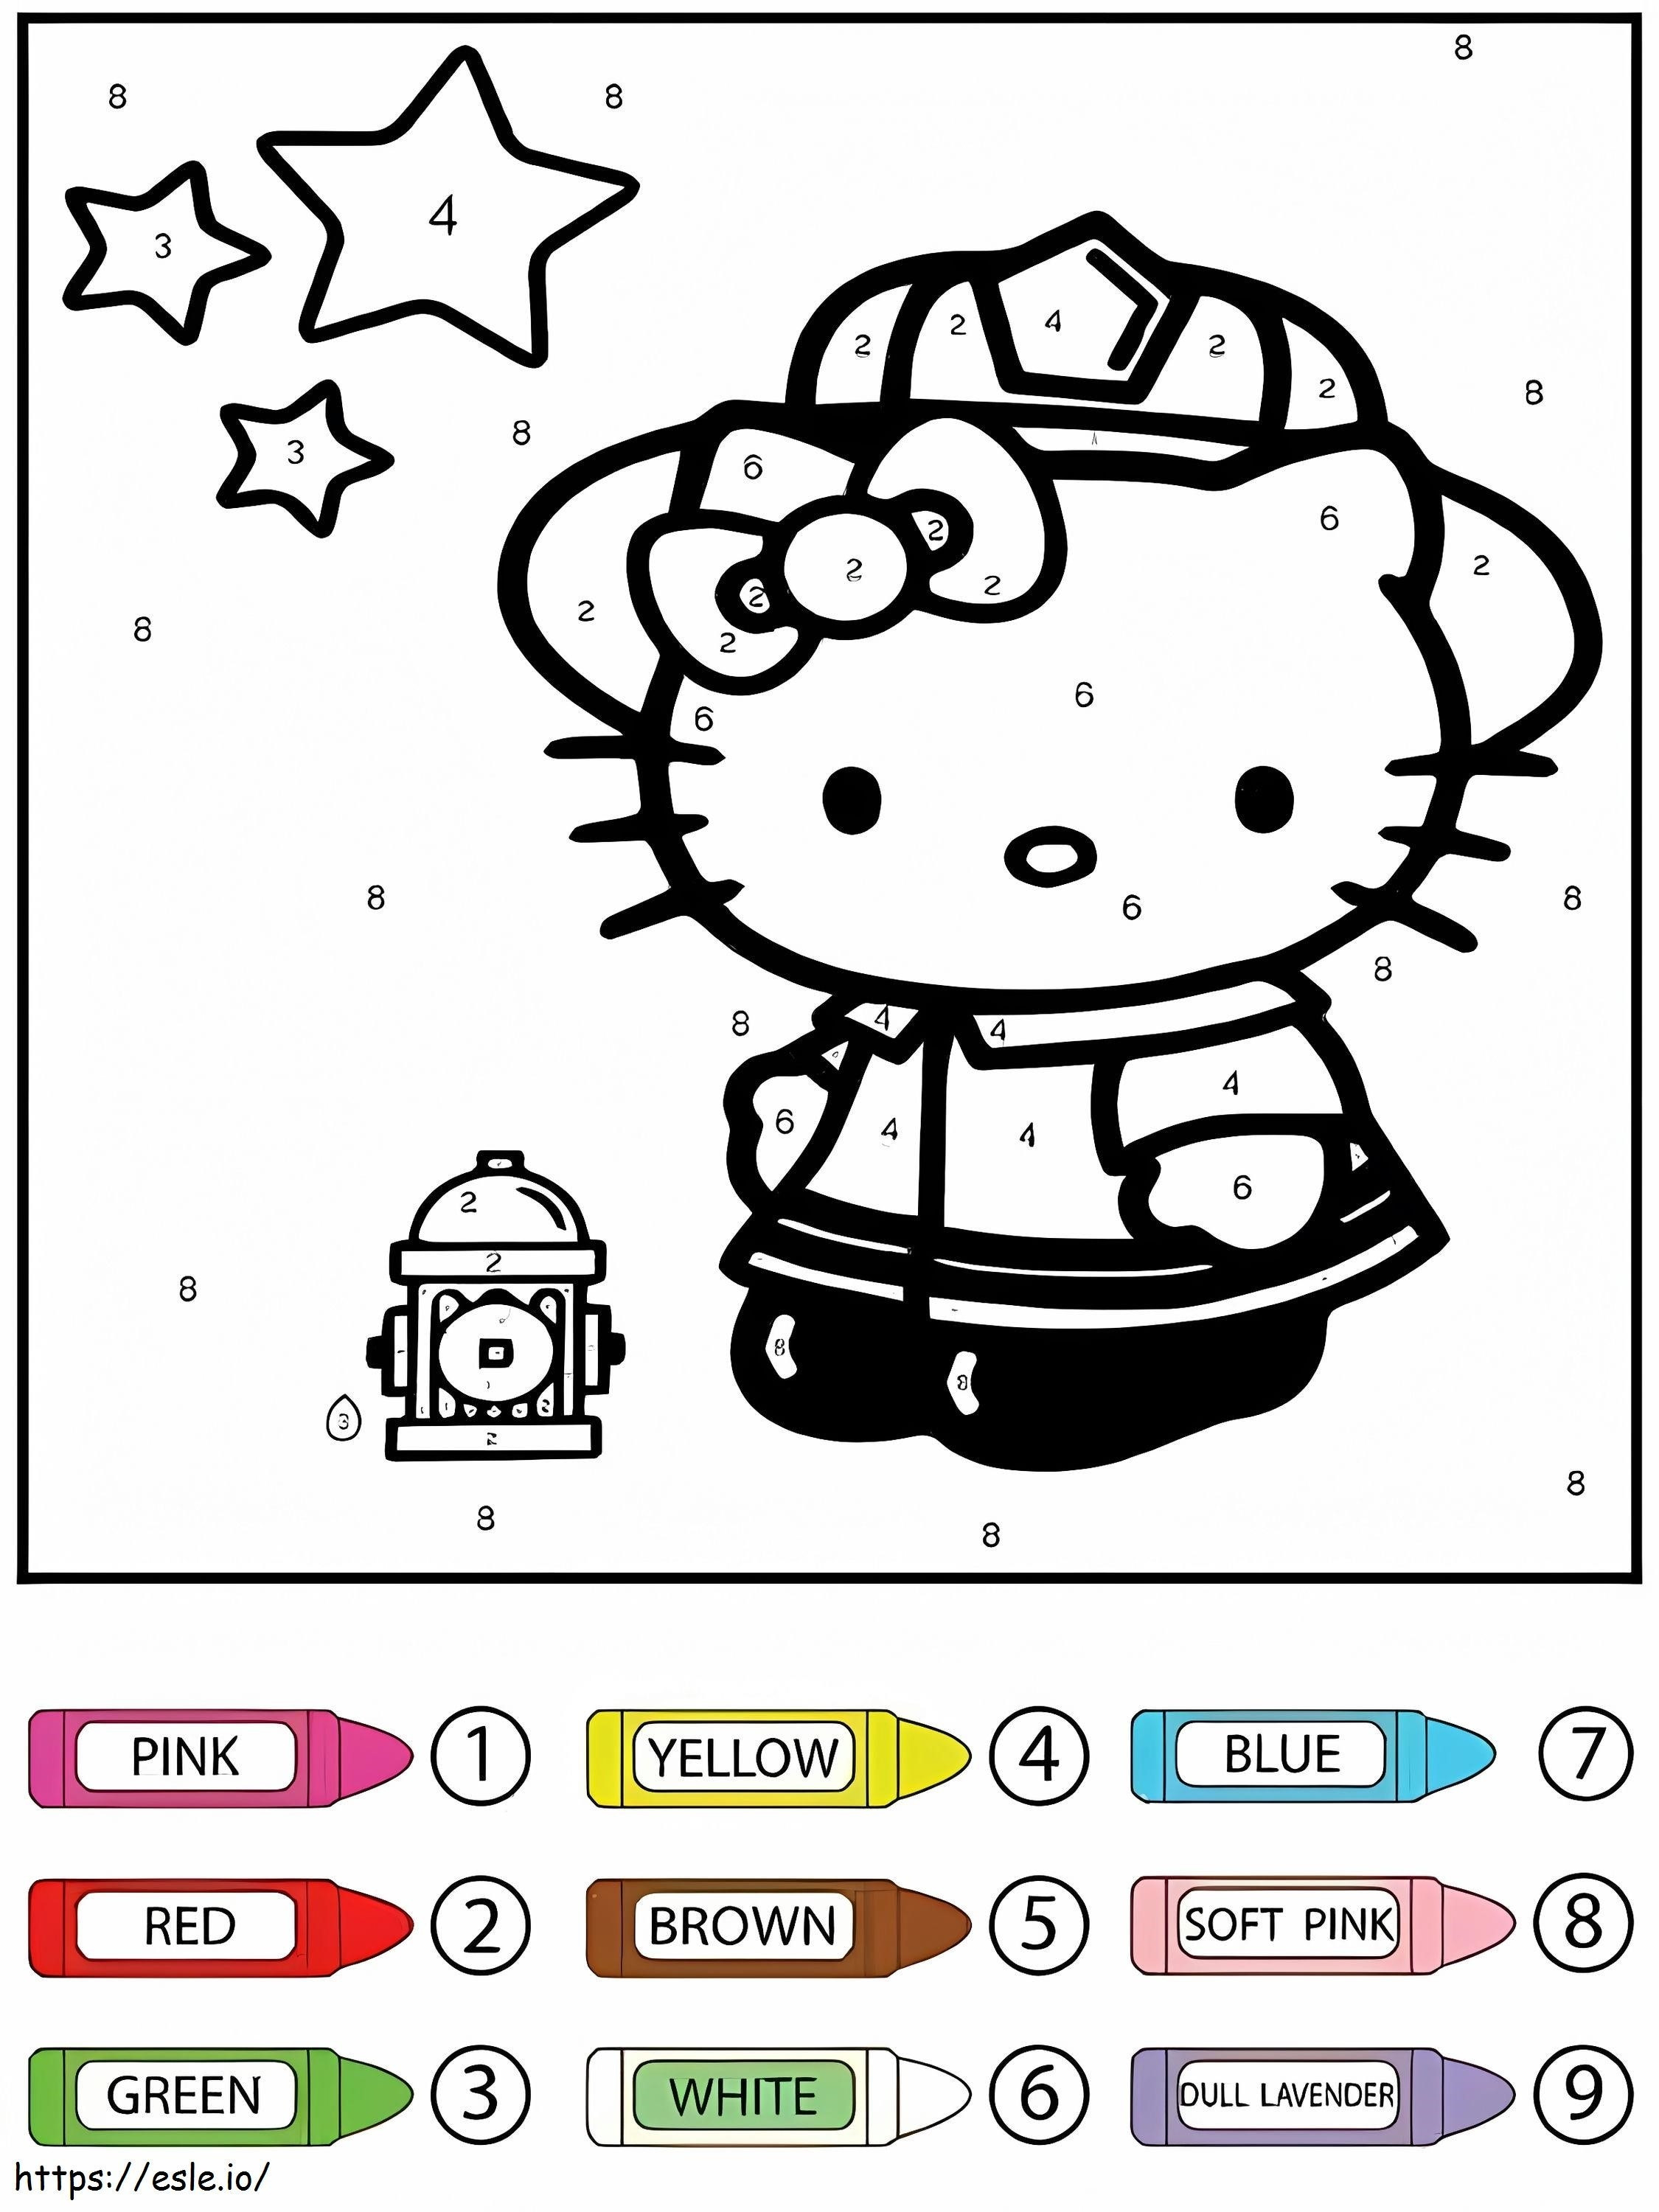 Fire Fighter Hello Kitty Color By Number coloring page